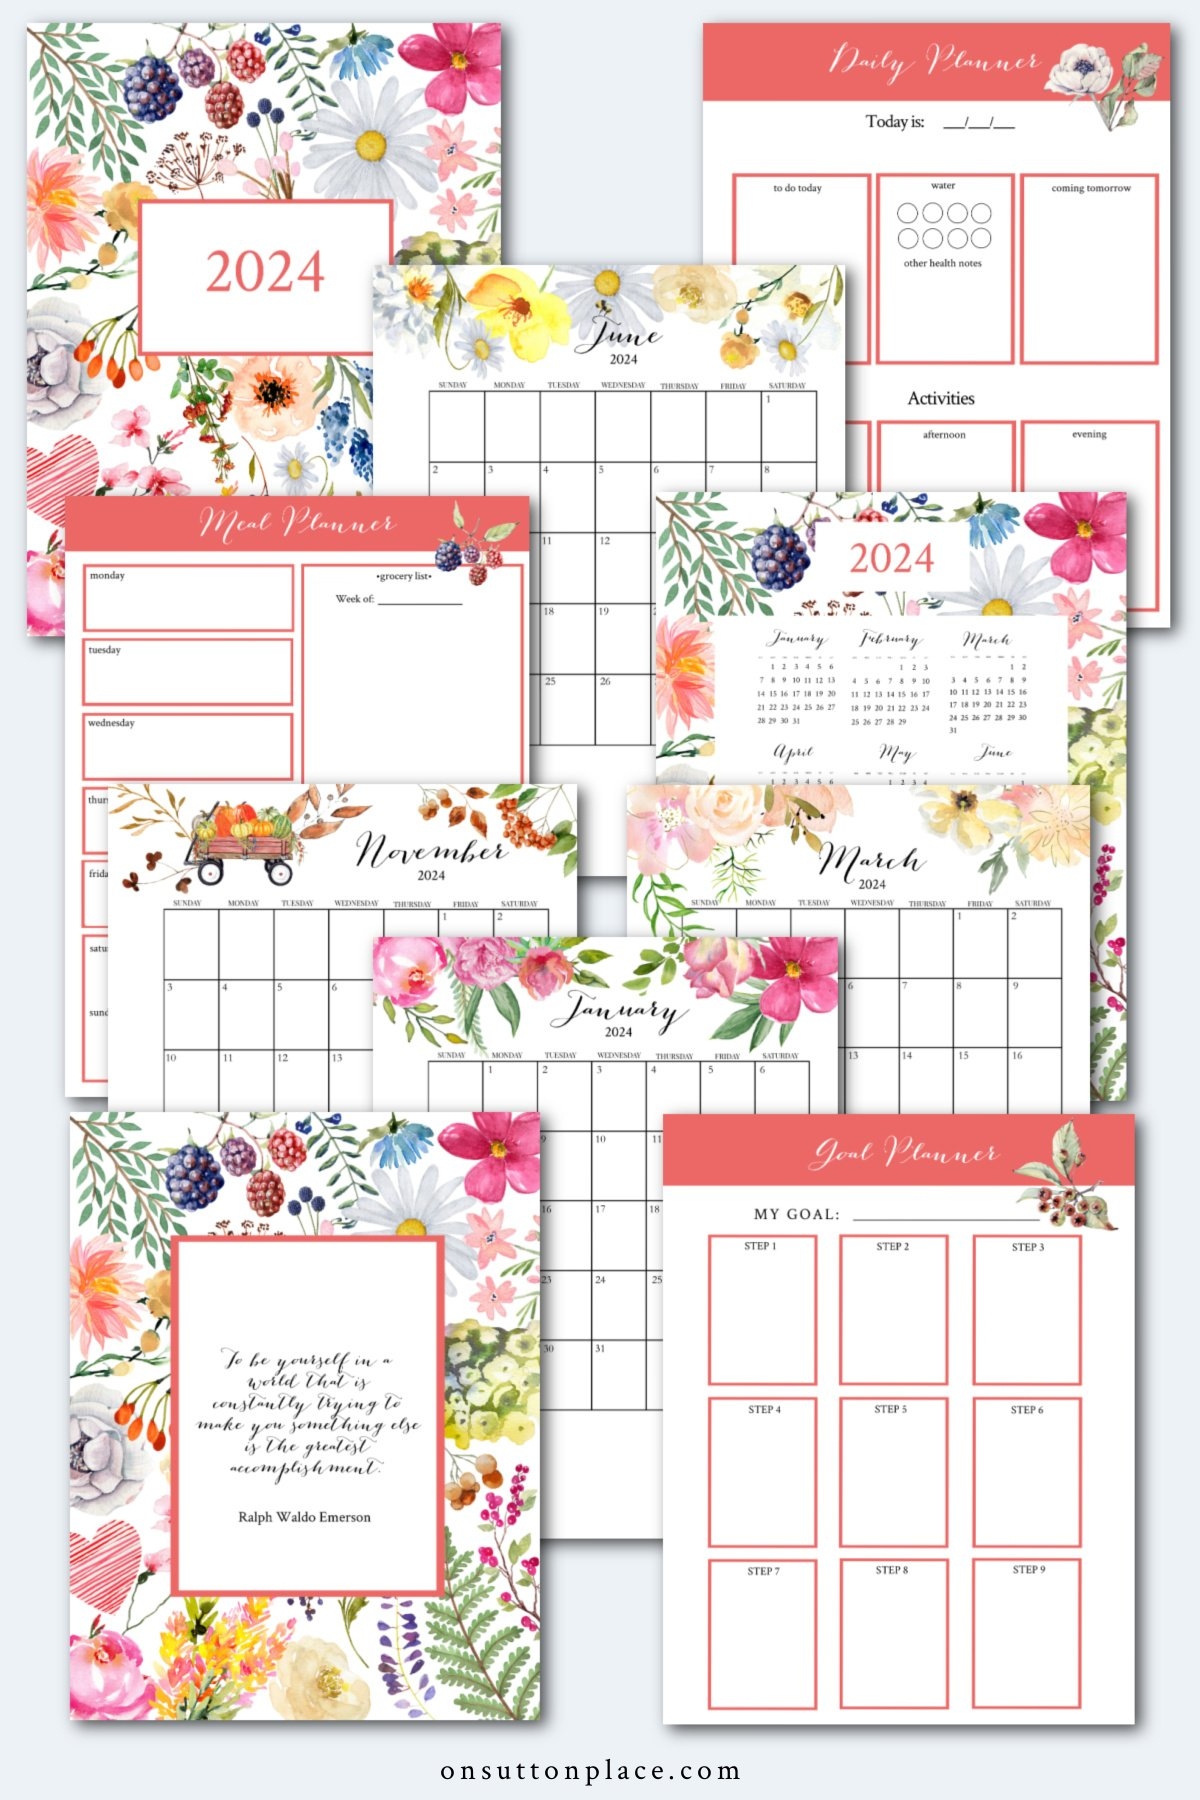 2024 Free Printable Calendar With Planner Pages - On Sutton Place in Free Printable Binder Calendar 2024